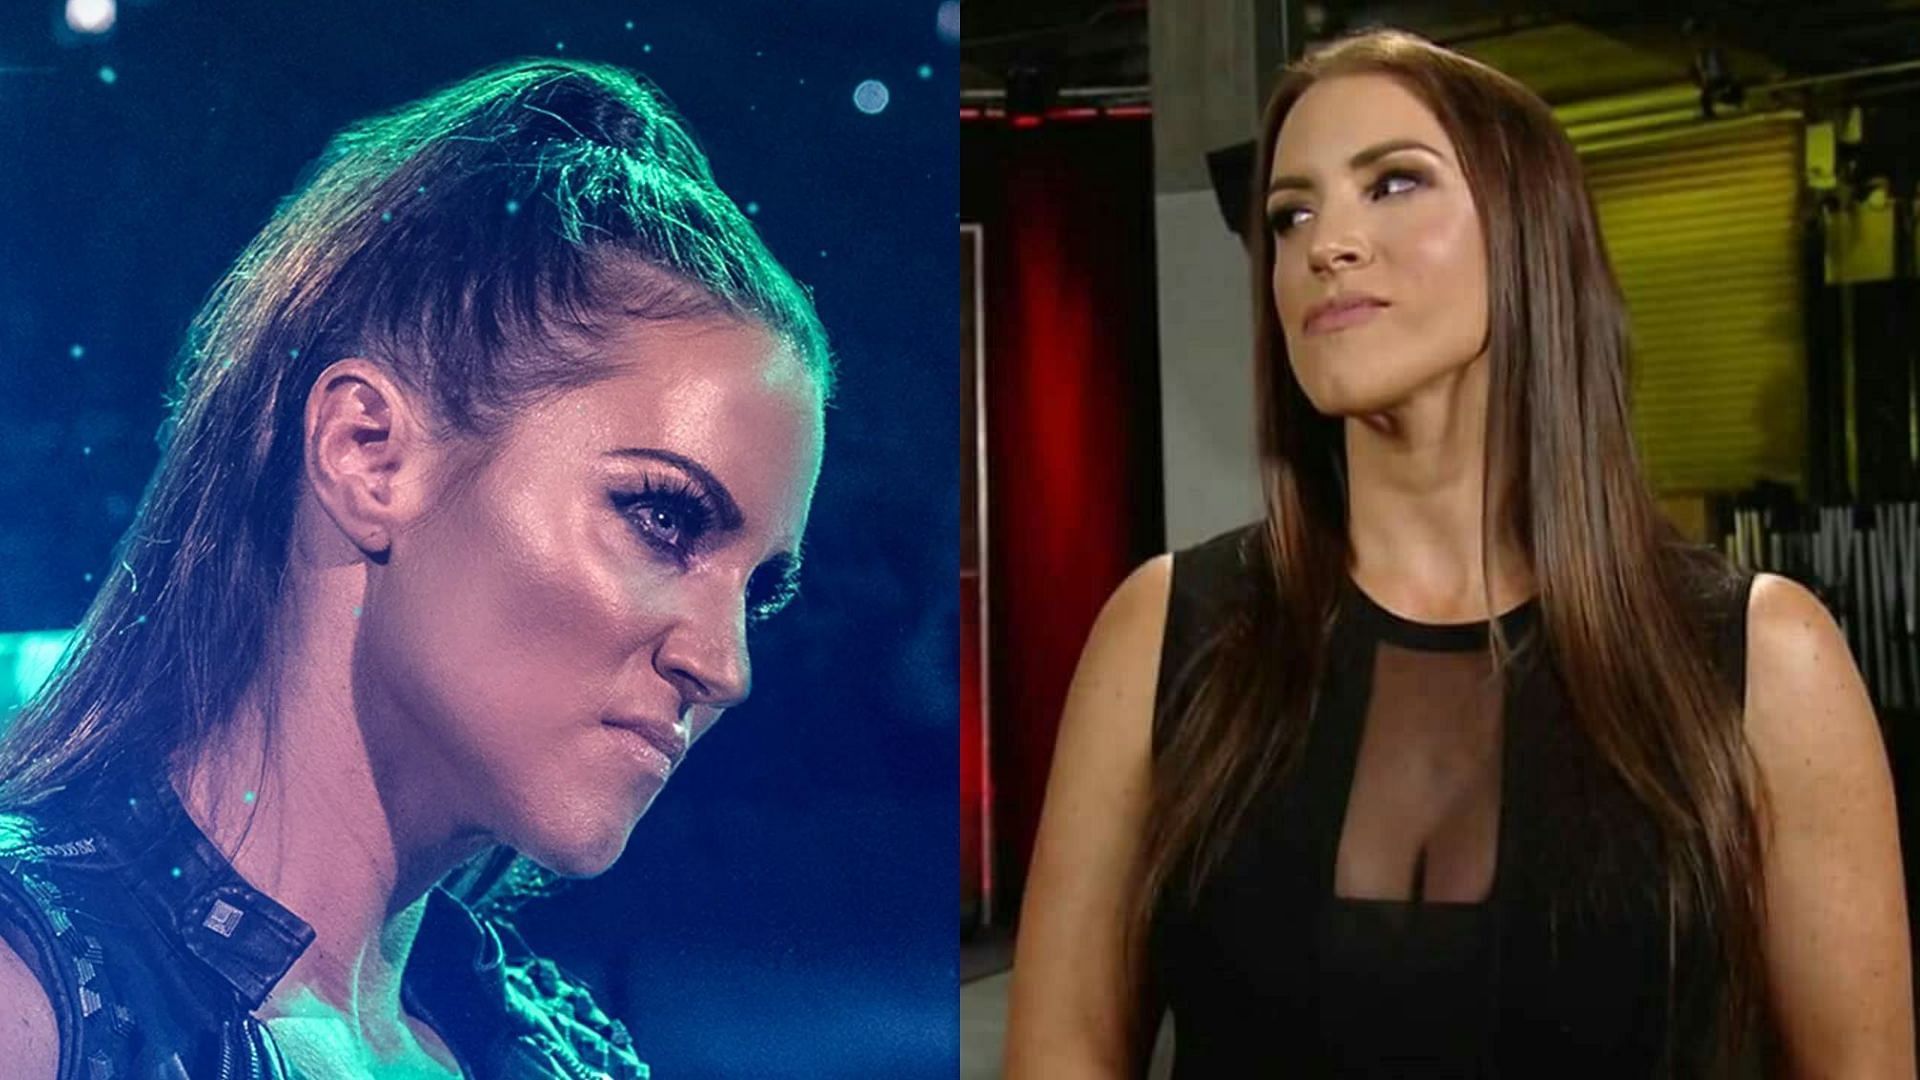 Stephanie McMahon is currently retired from in-ring competition